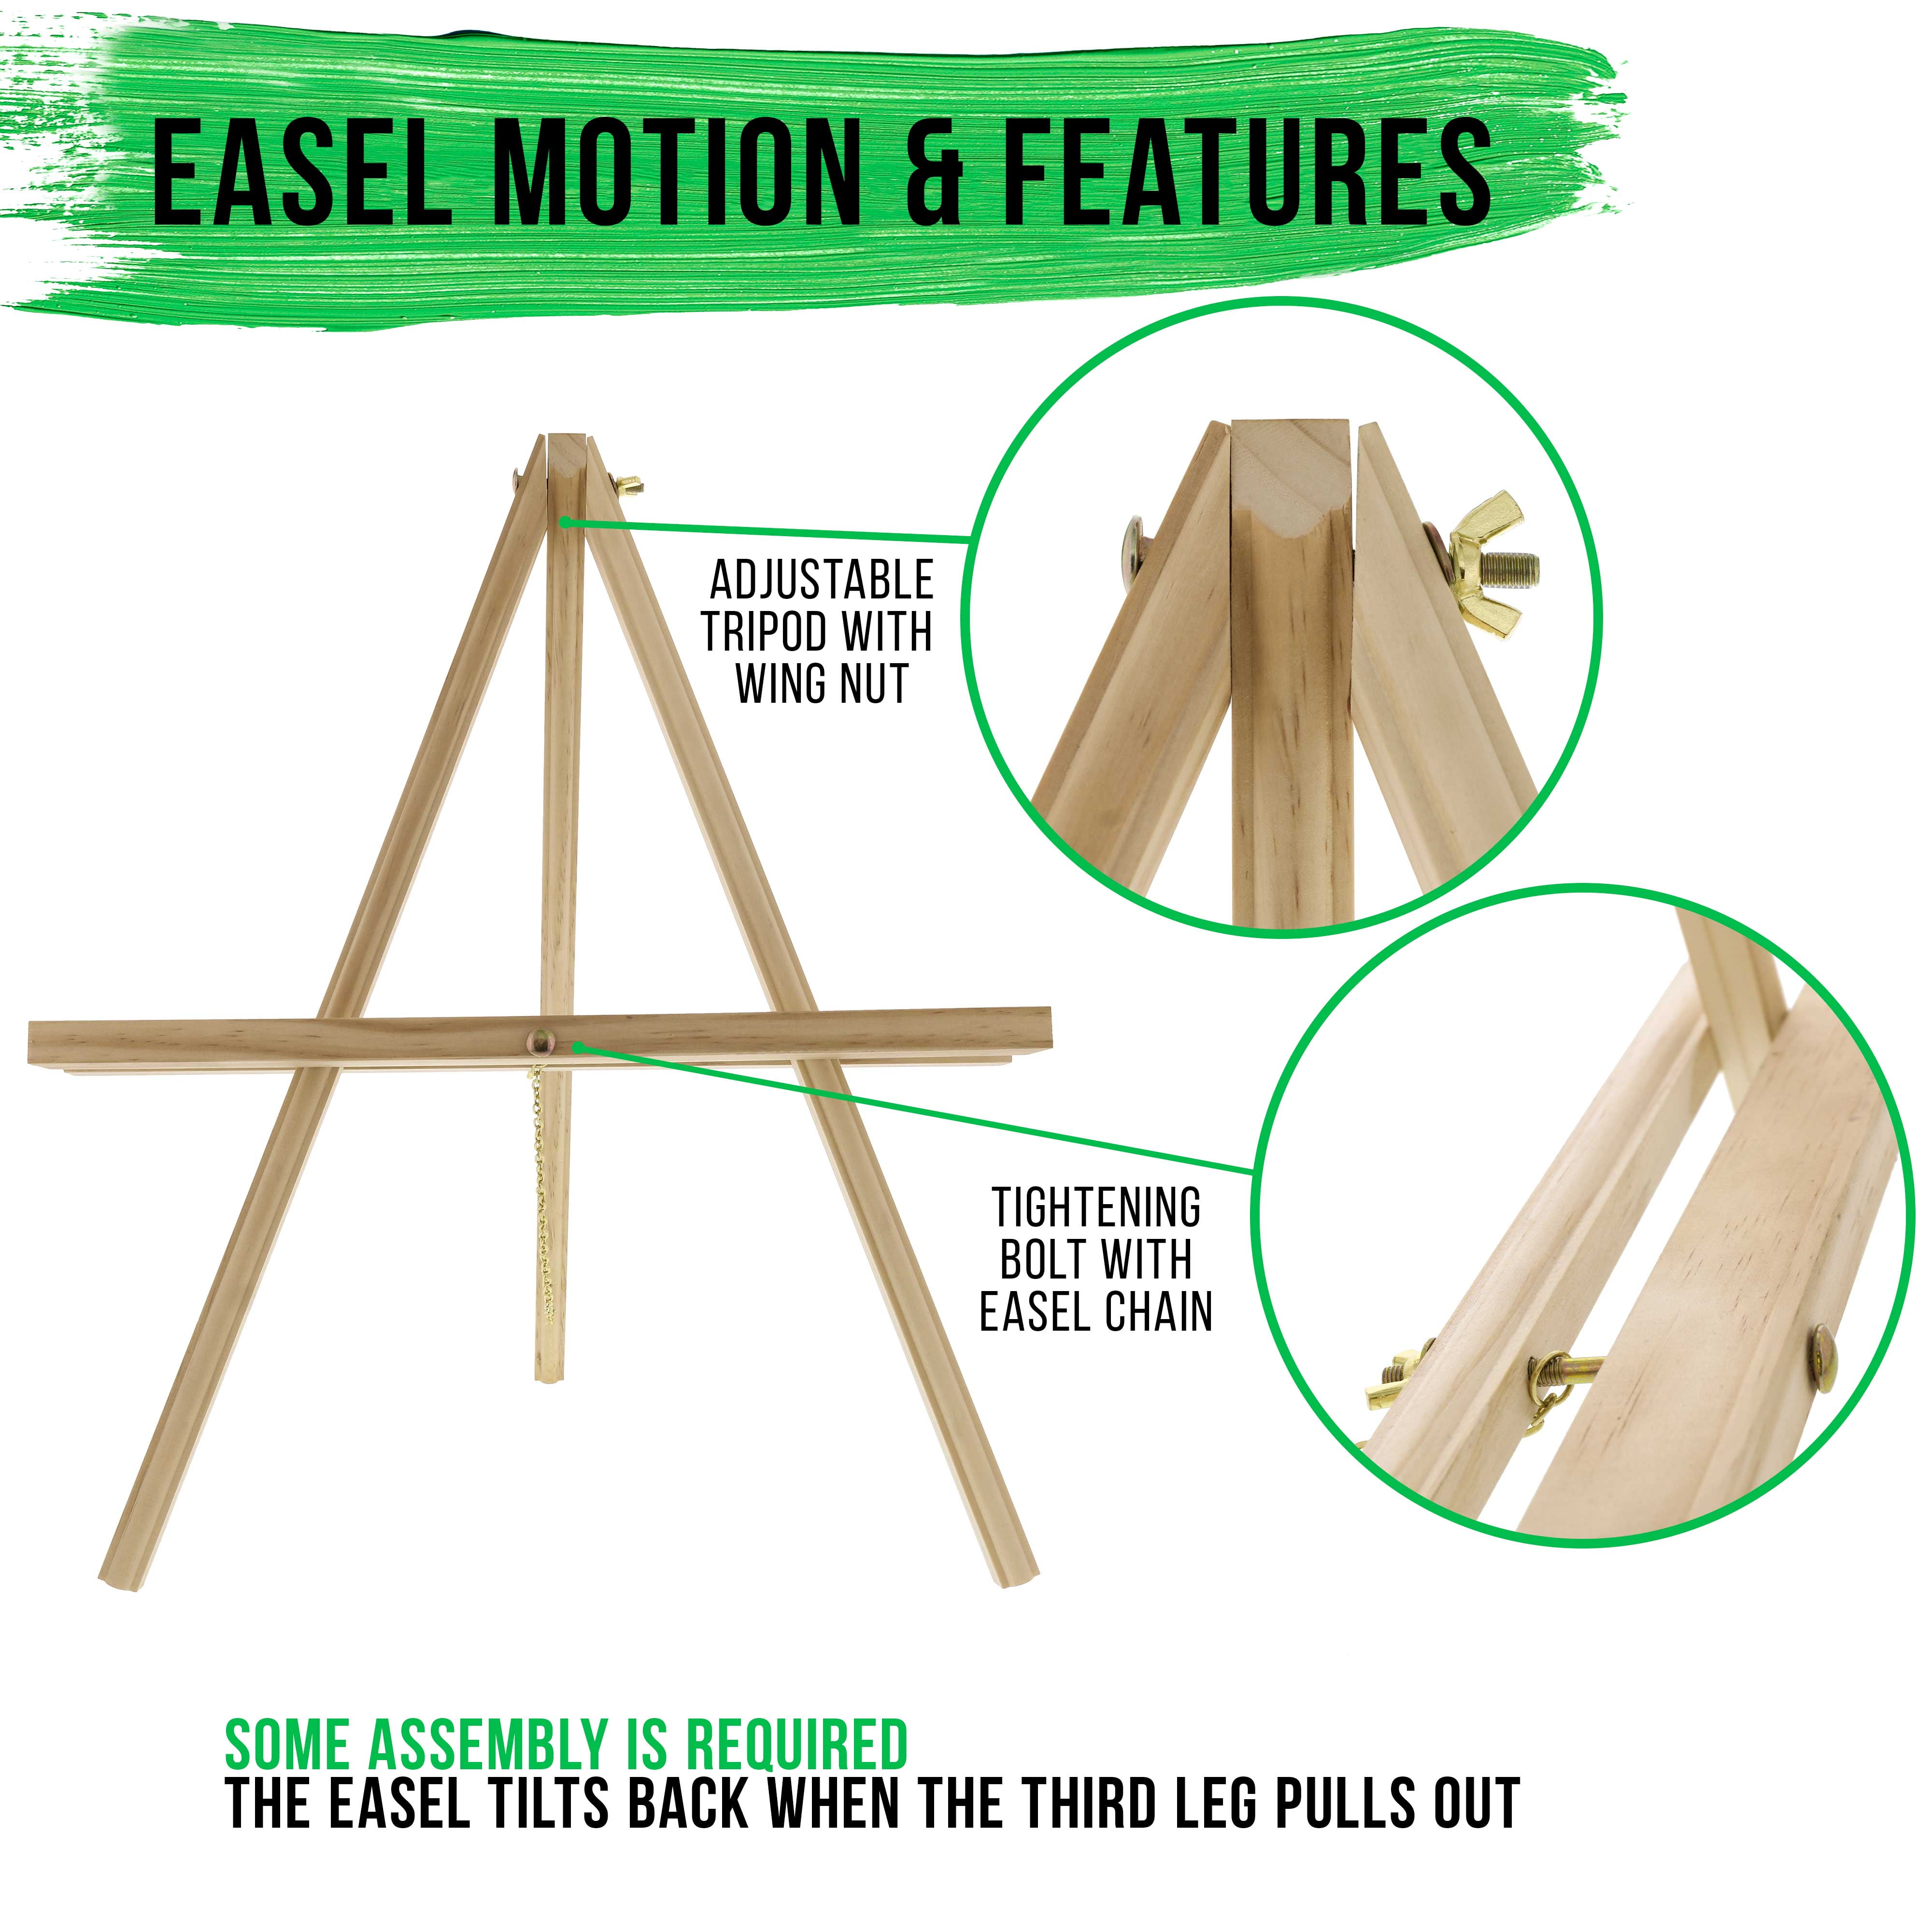 Oypla 6ft 1800mm Wooden Pine Tripod Studio Canvas Easel Art Stand